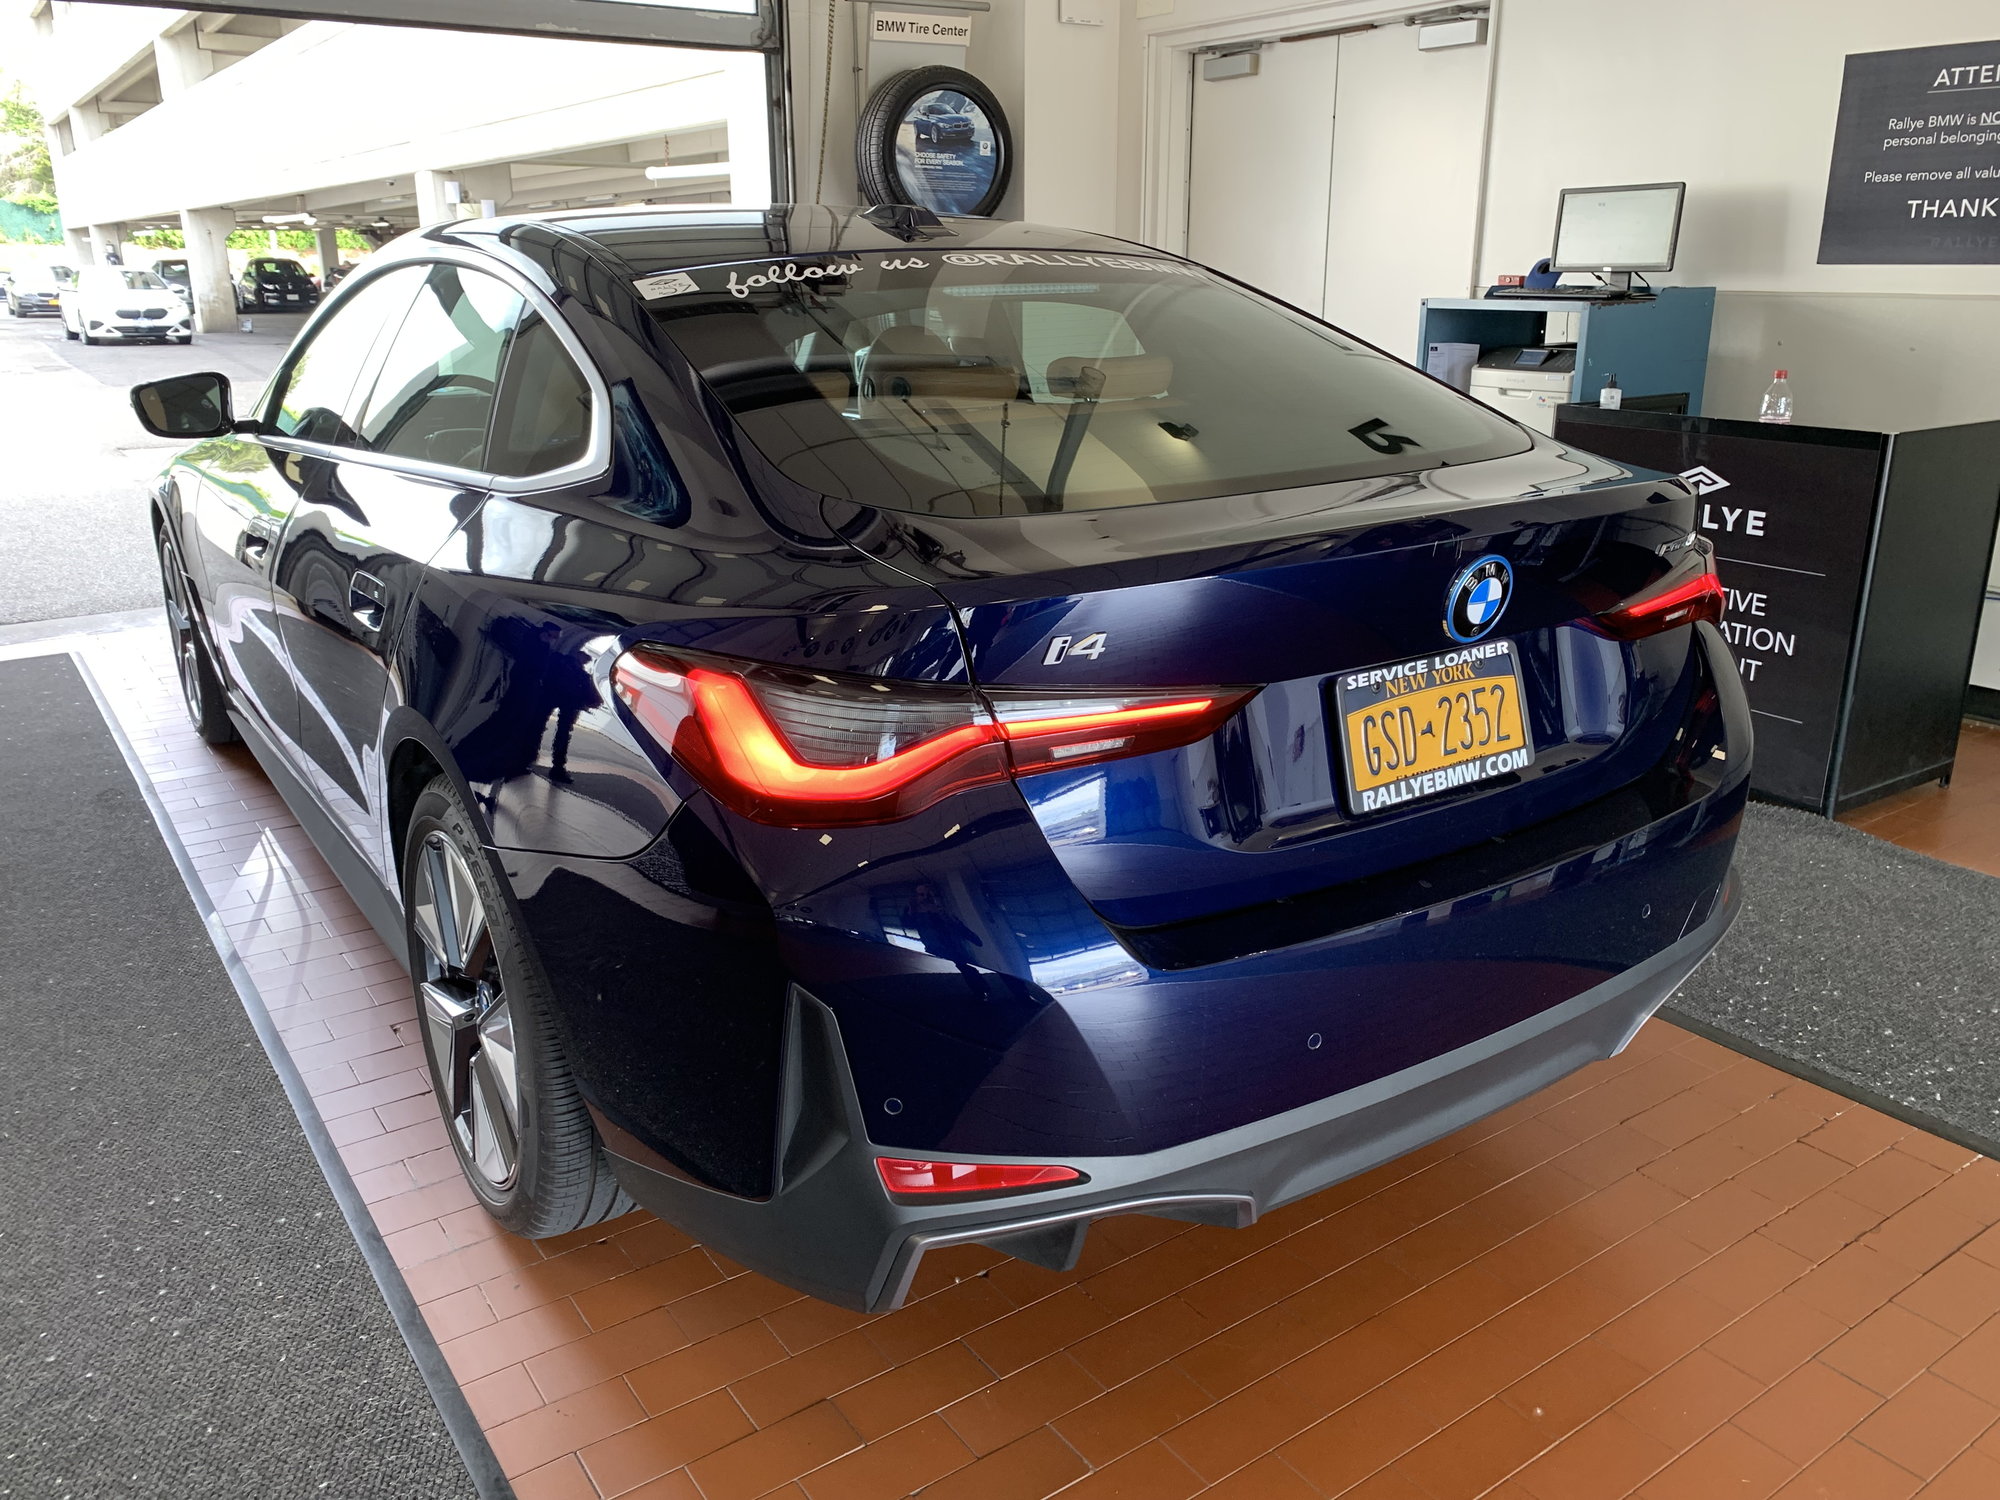 BMW i4 Review - The Perfect EV for traditional “old” buyer! - ClubLexus -  Lexus Forum Discussion